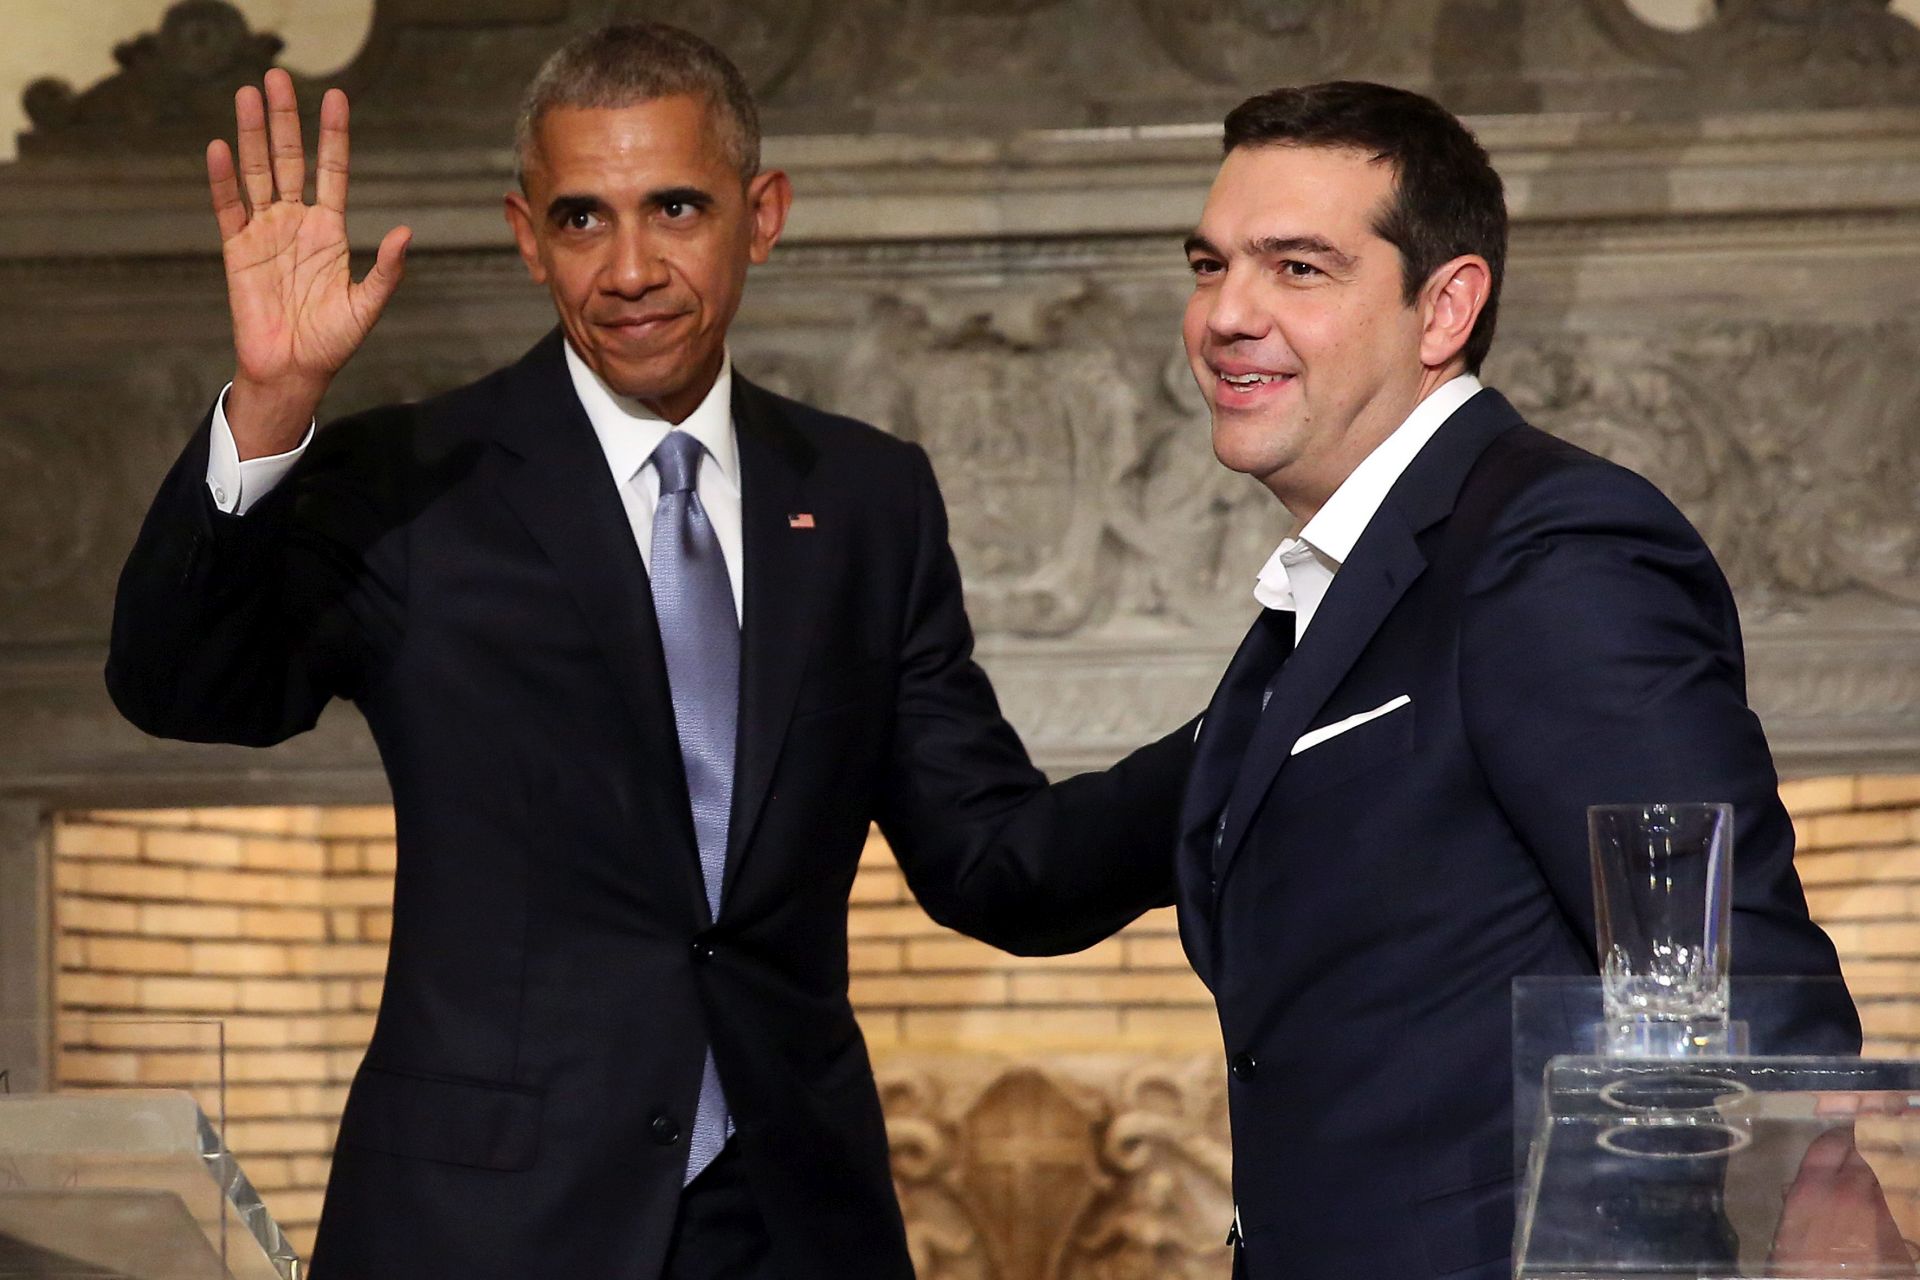 epa05632530 US President Barack Obama (L) and Greek Prime Minister Alexis Tsipras (R) during a press conference after a meeting  in Athens, Greece, 15 November 2016. President Obama is in Athens on a two-day official visit.  EPA/ORESTIS PANAGIOTOU